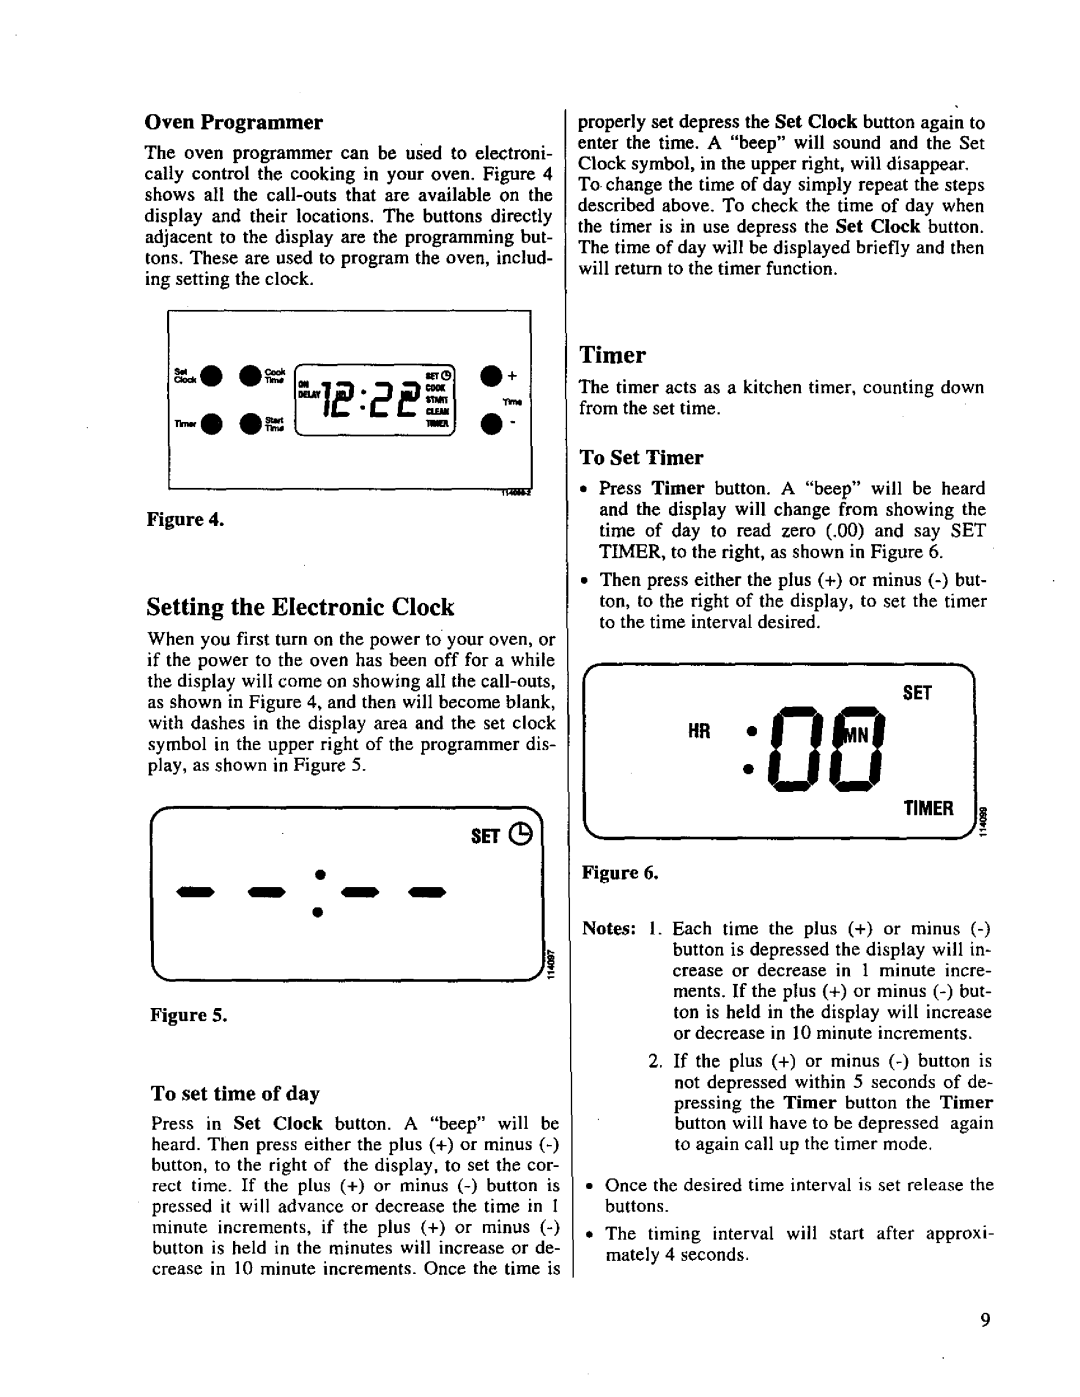 Bosch Appliances HBL 65, HBL 64, HBL 63 Setting the Electronic Clock, Oven Programmer, To Set Timer, To set time of day 